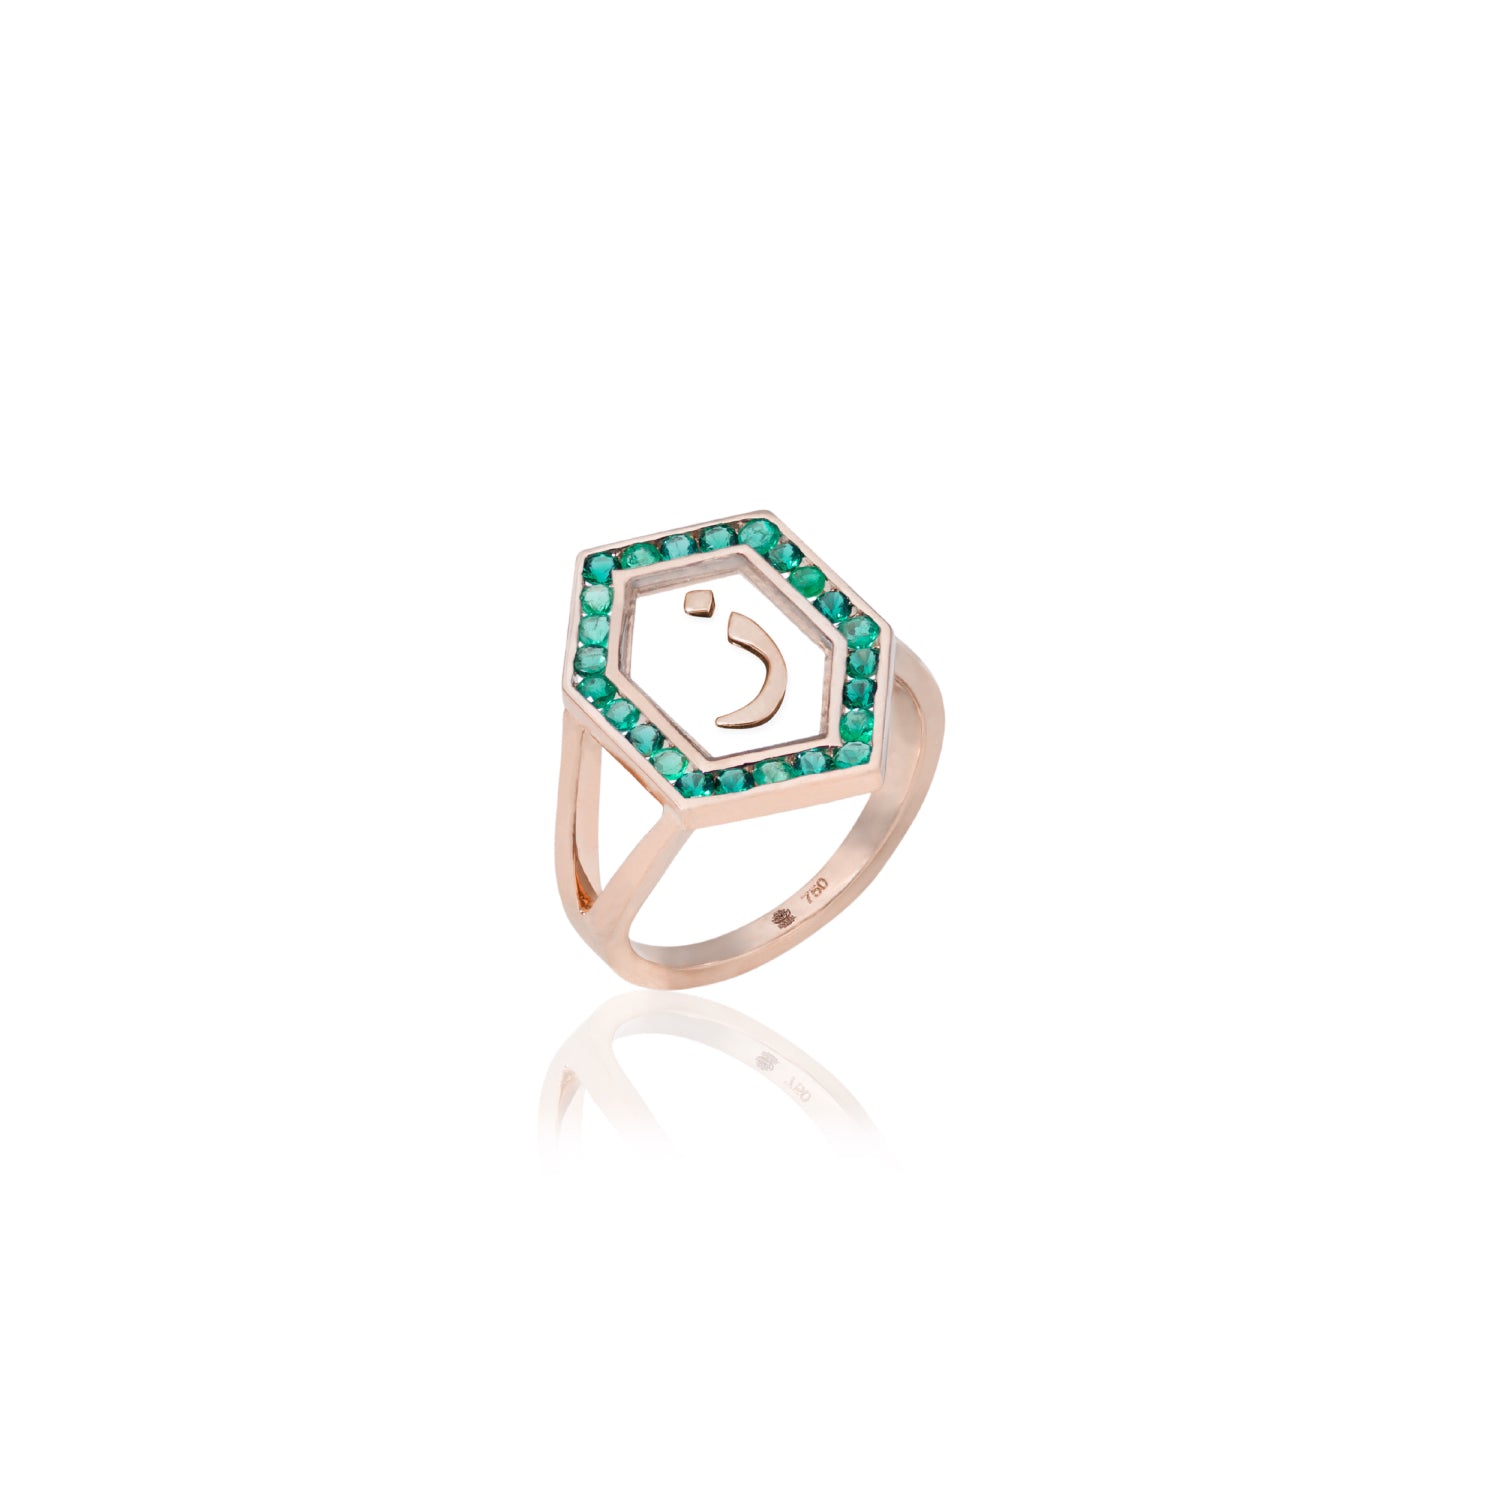 Qamoos 1.0 Letter ز Emerald Ring in Rose Gold